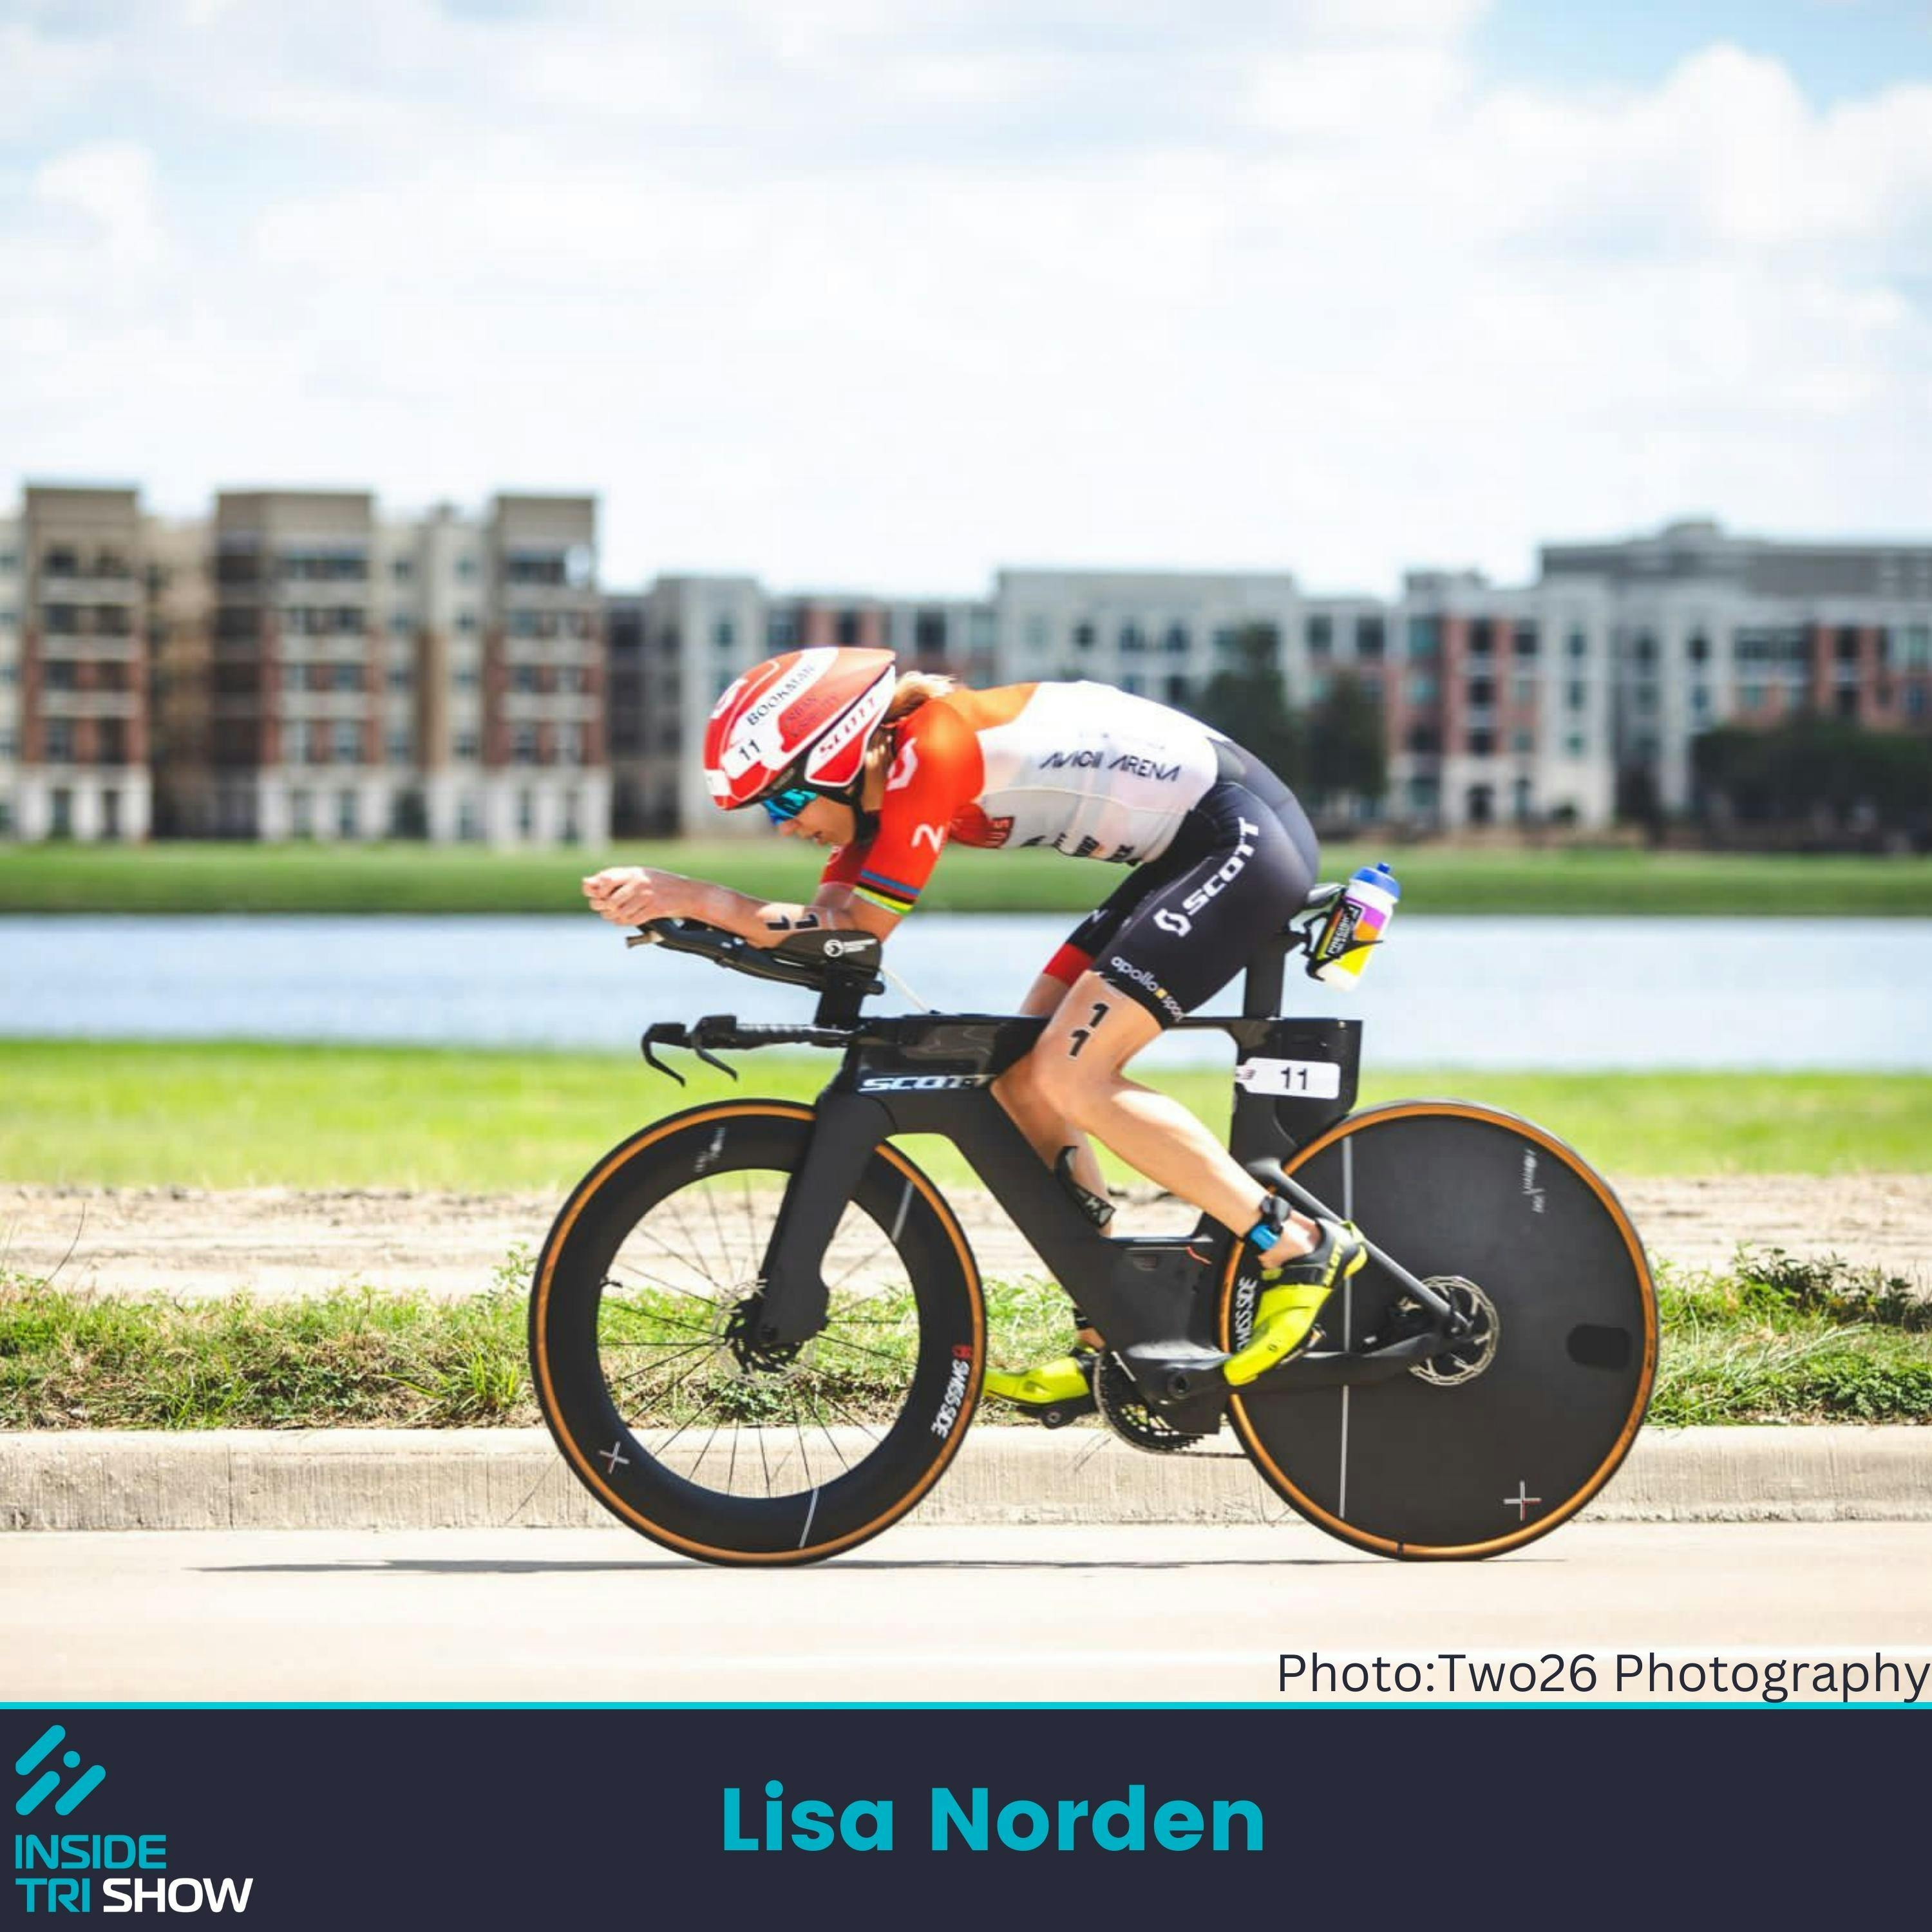 Lisa Norden: Excelling amongst strong women